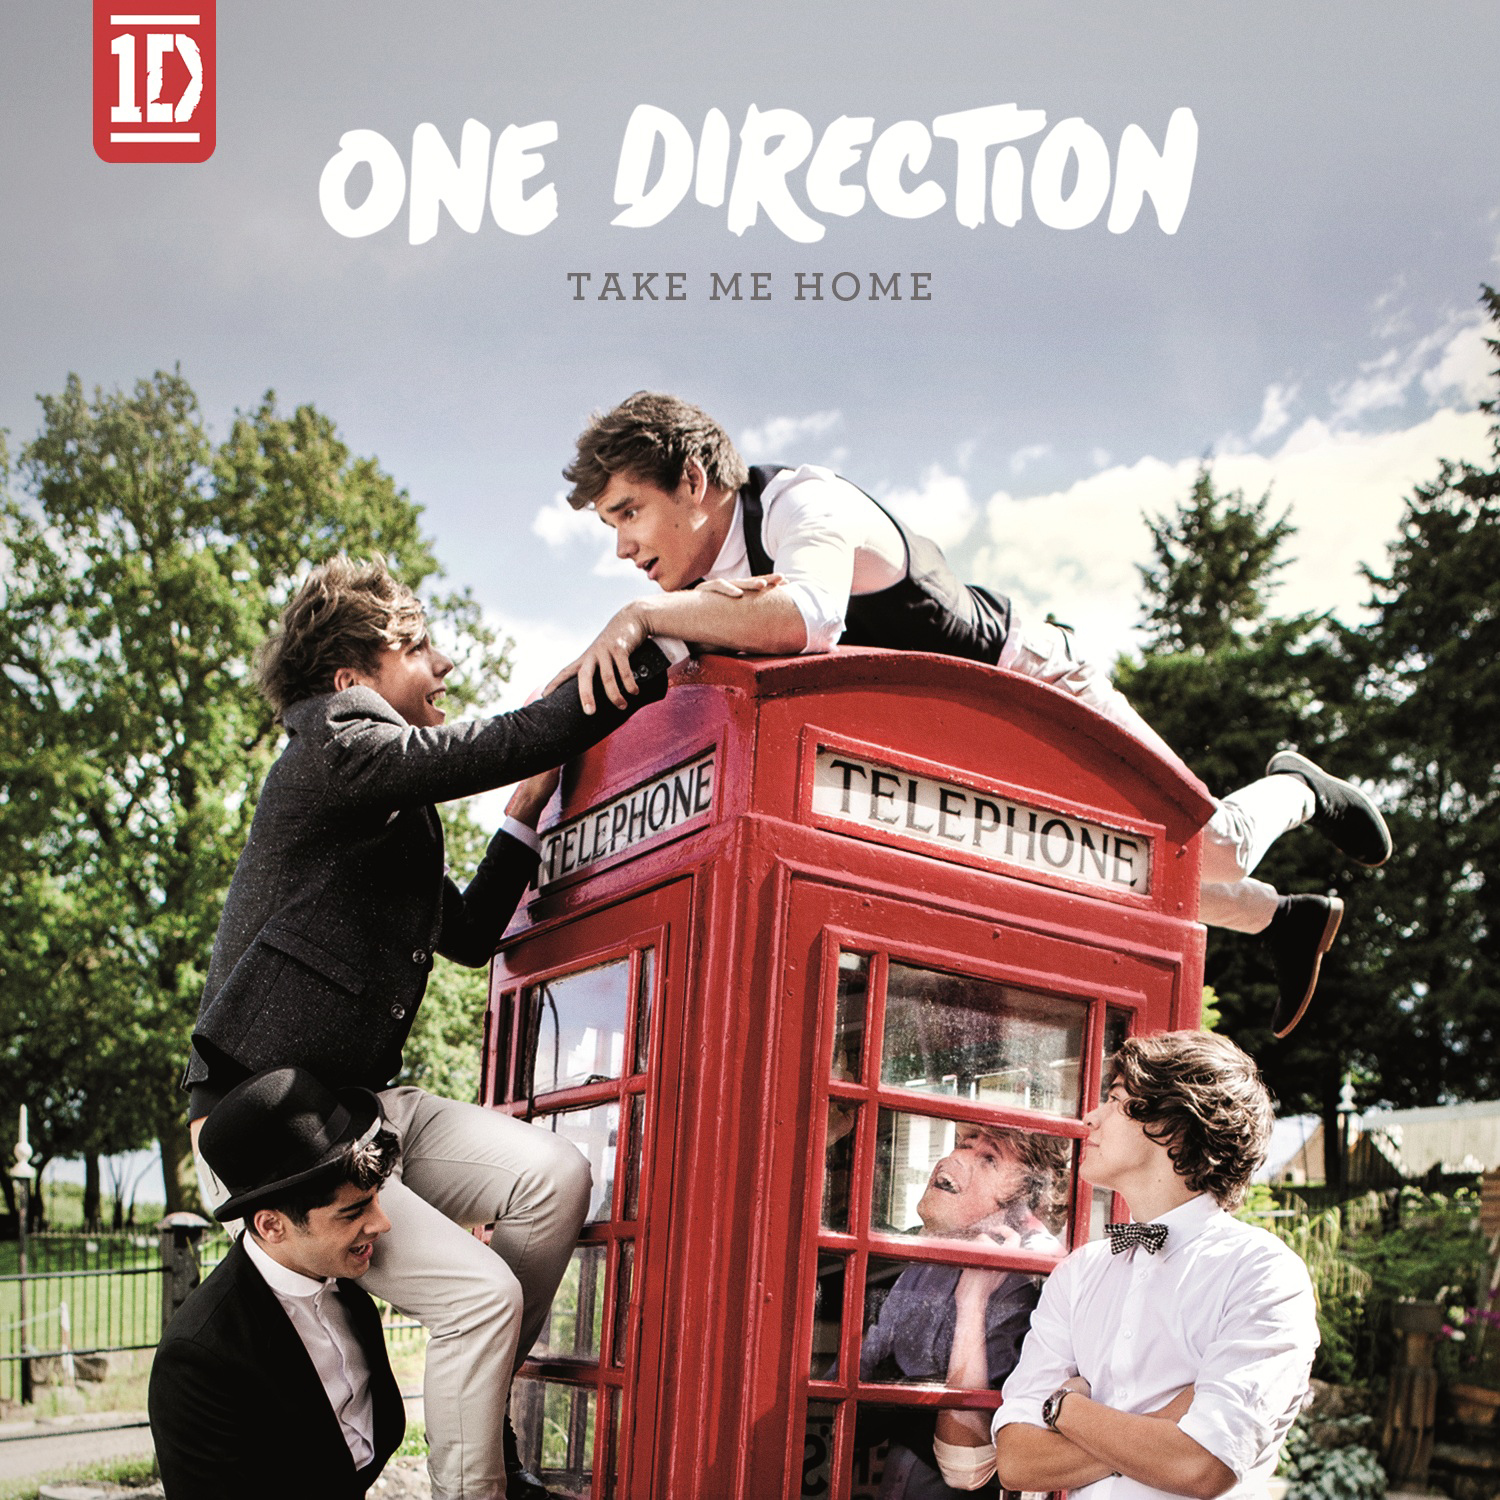 One Direction - "Take Me Home"